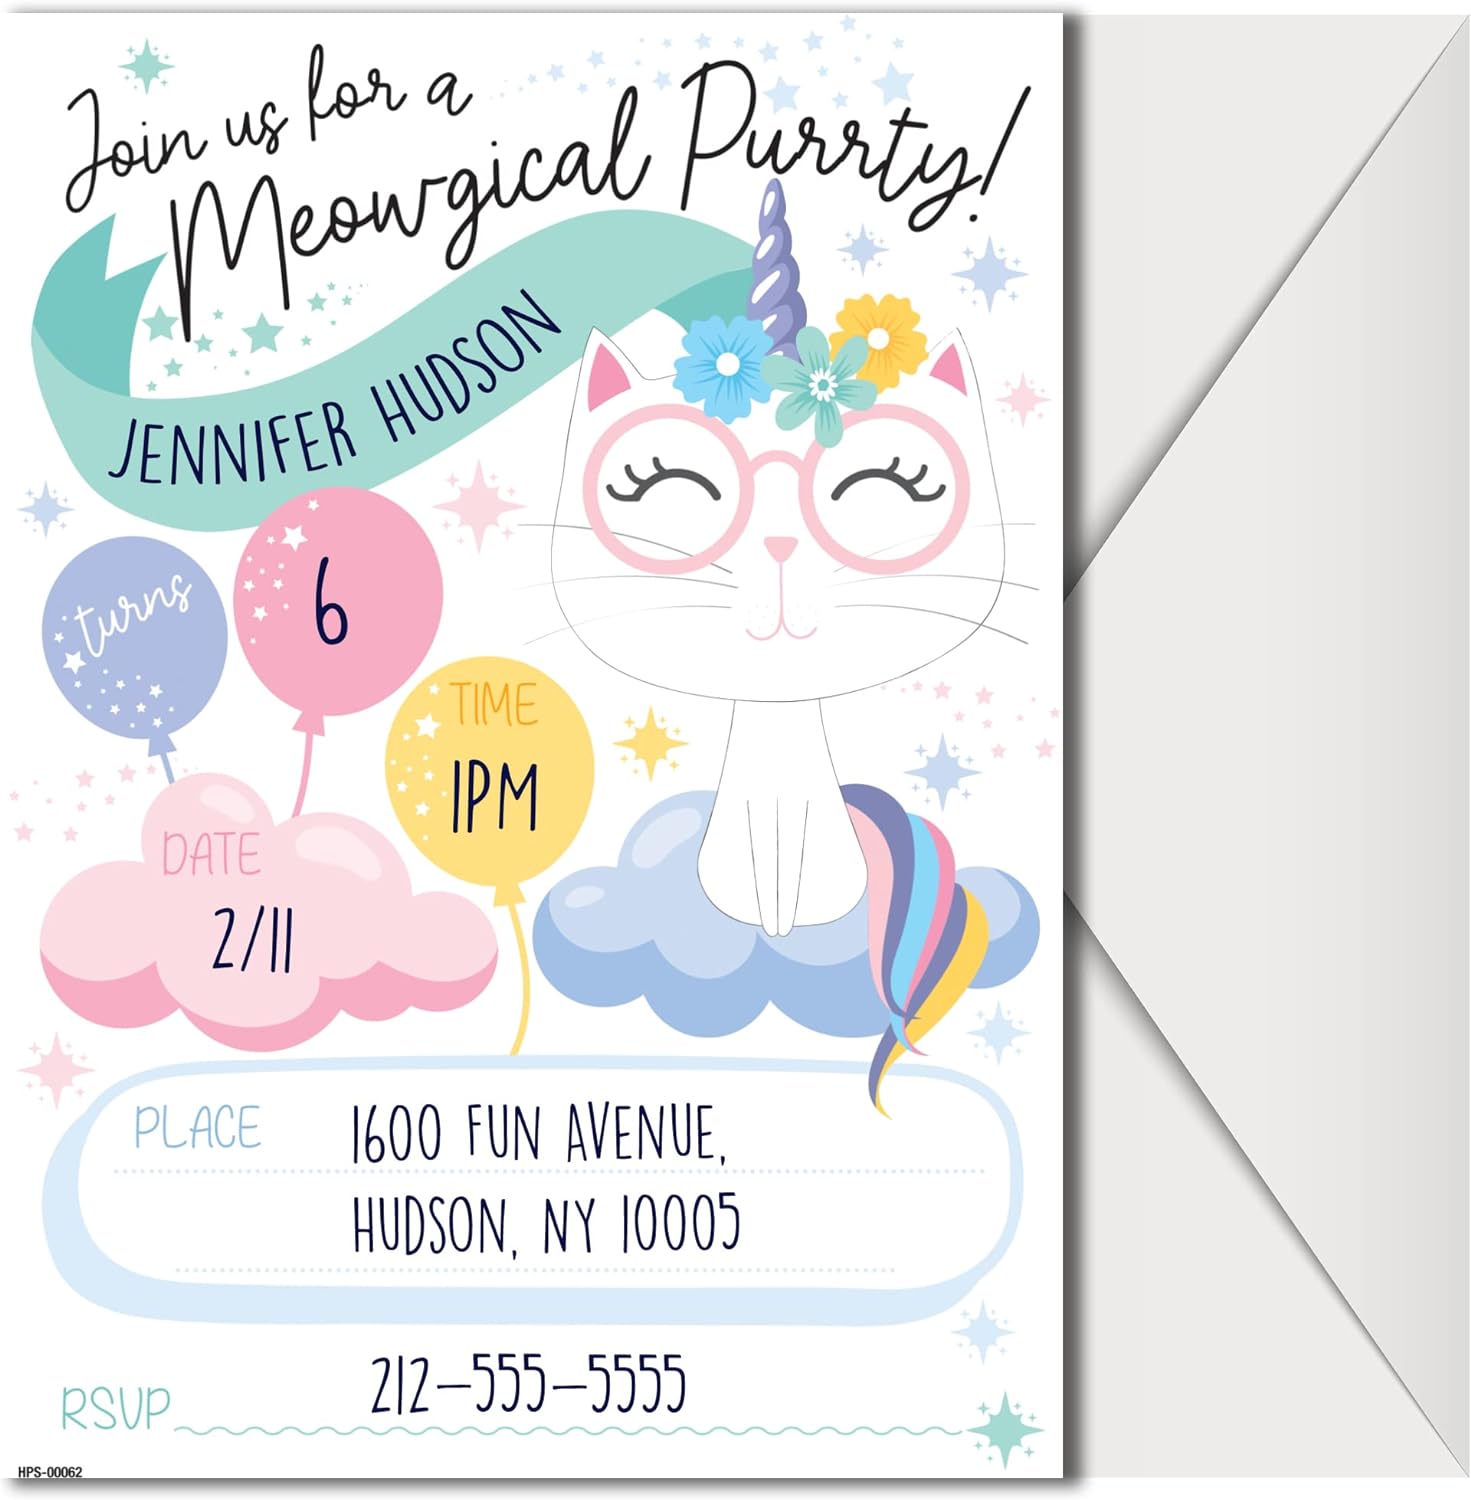 Caticorn Party Invitations with Envelopes - (Pack of 20)